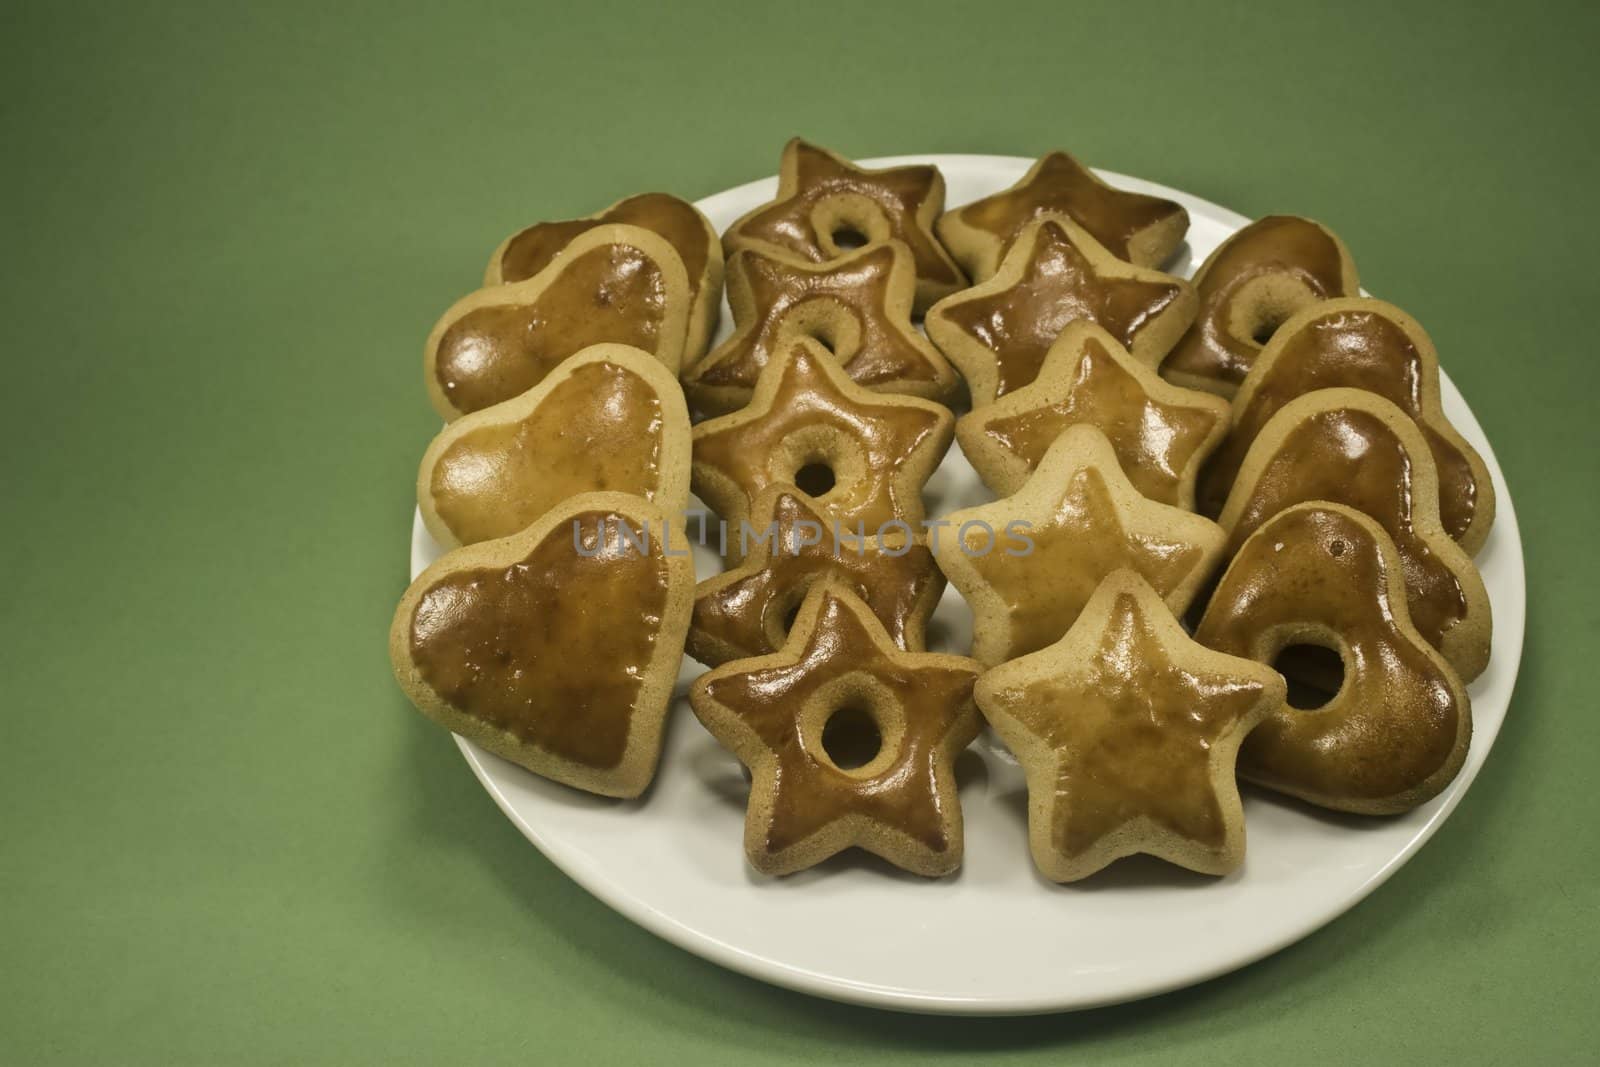 Plate of Christmas cookies by timscottrom